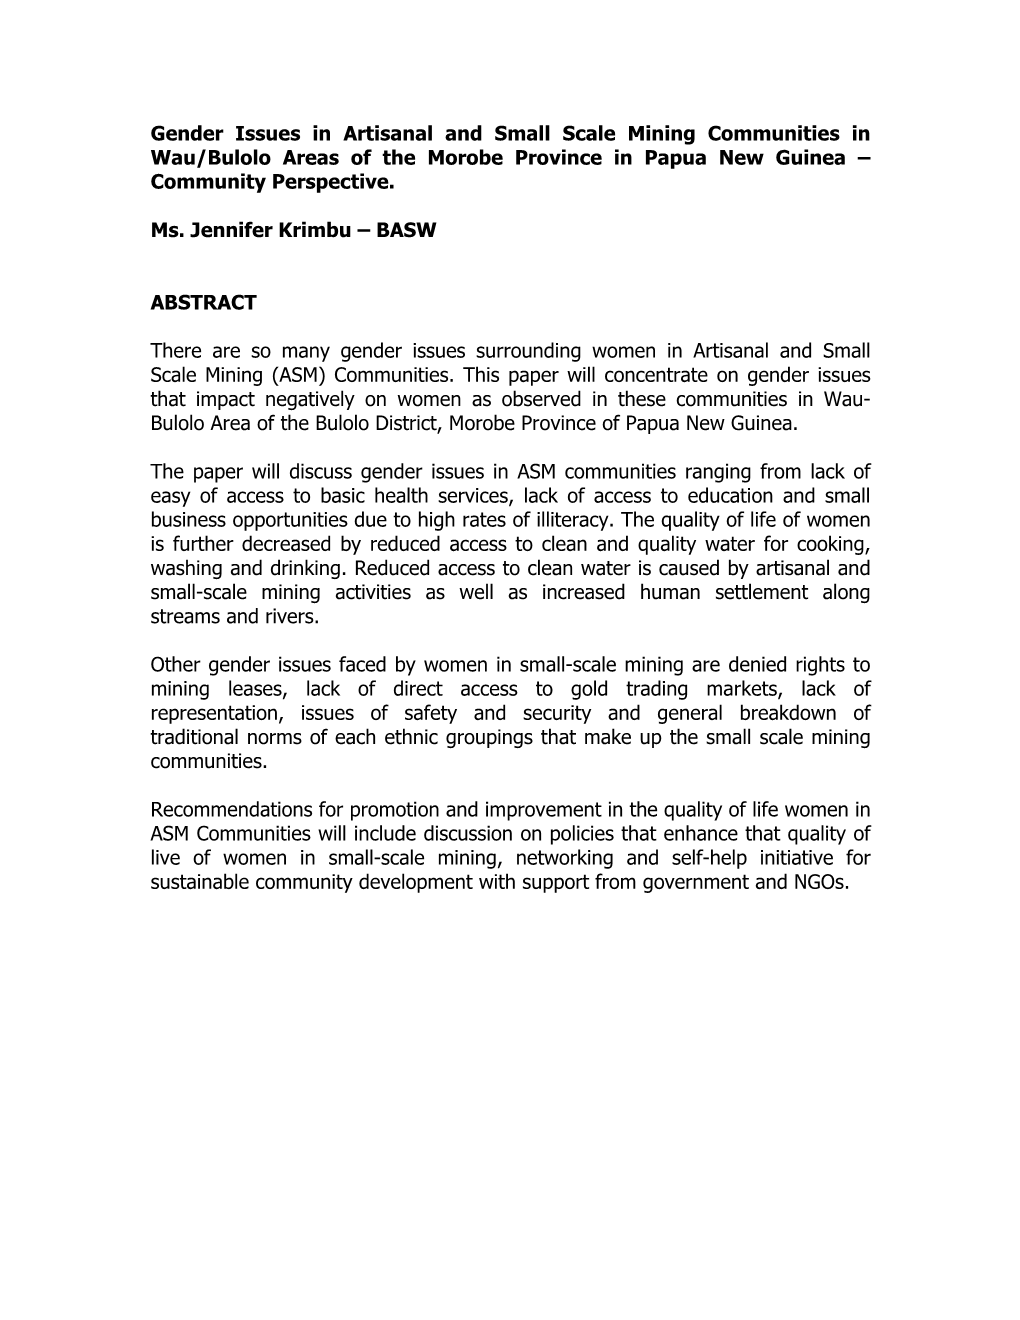 Gender Issues in Artisanal and Small Scale Mining Communities in Wau/Bulolo Areas of the Morobe Province in Papua New Guinea – Community Perspective